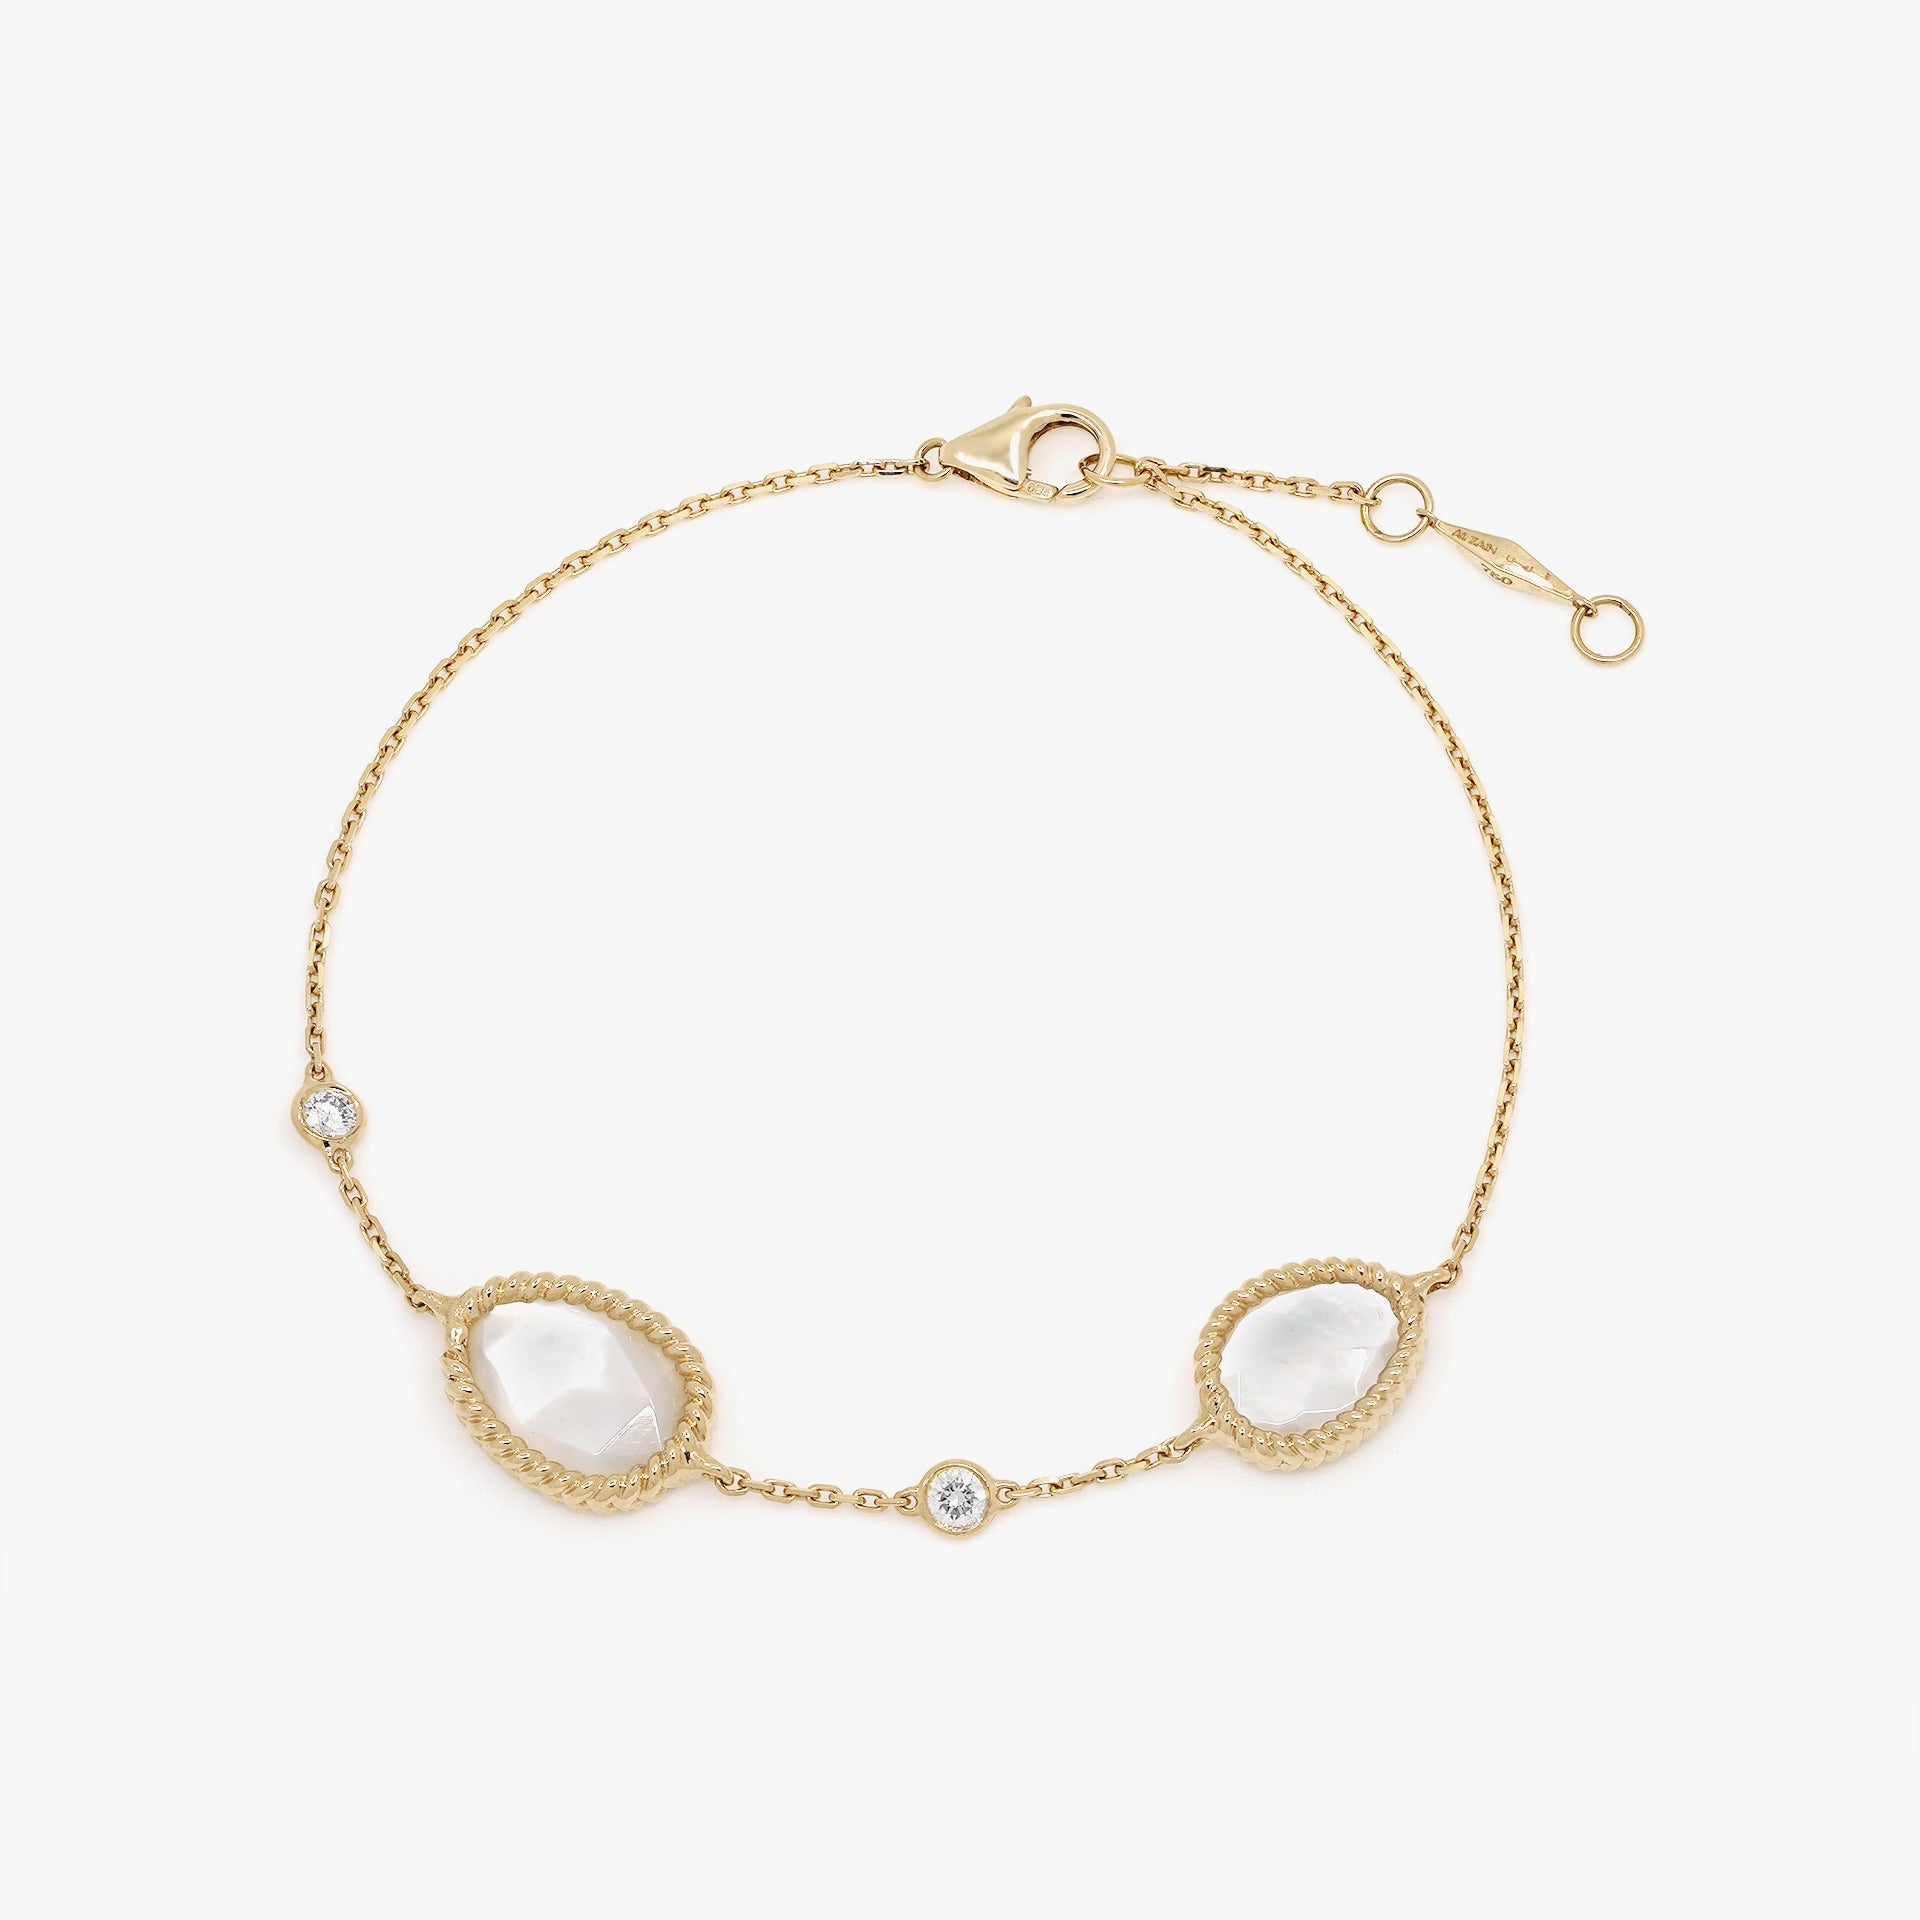 Nina Mariner Double Stone Bracelet In 18 Karat Yellow Gold With Natural White Diamonds And Mother Of Pearl Stones